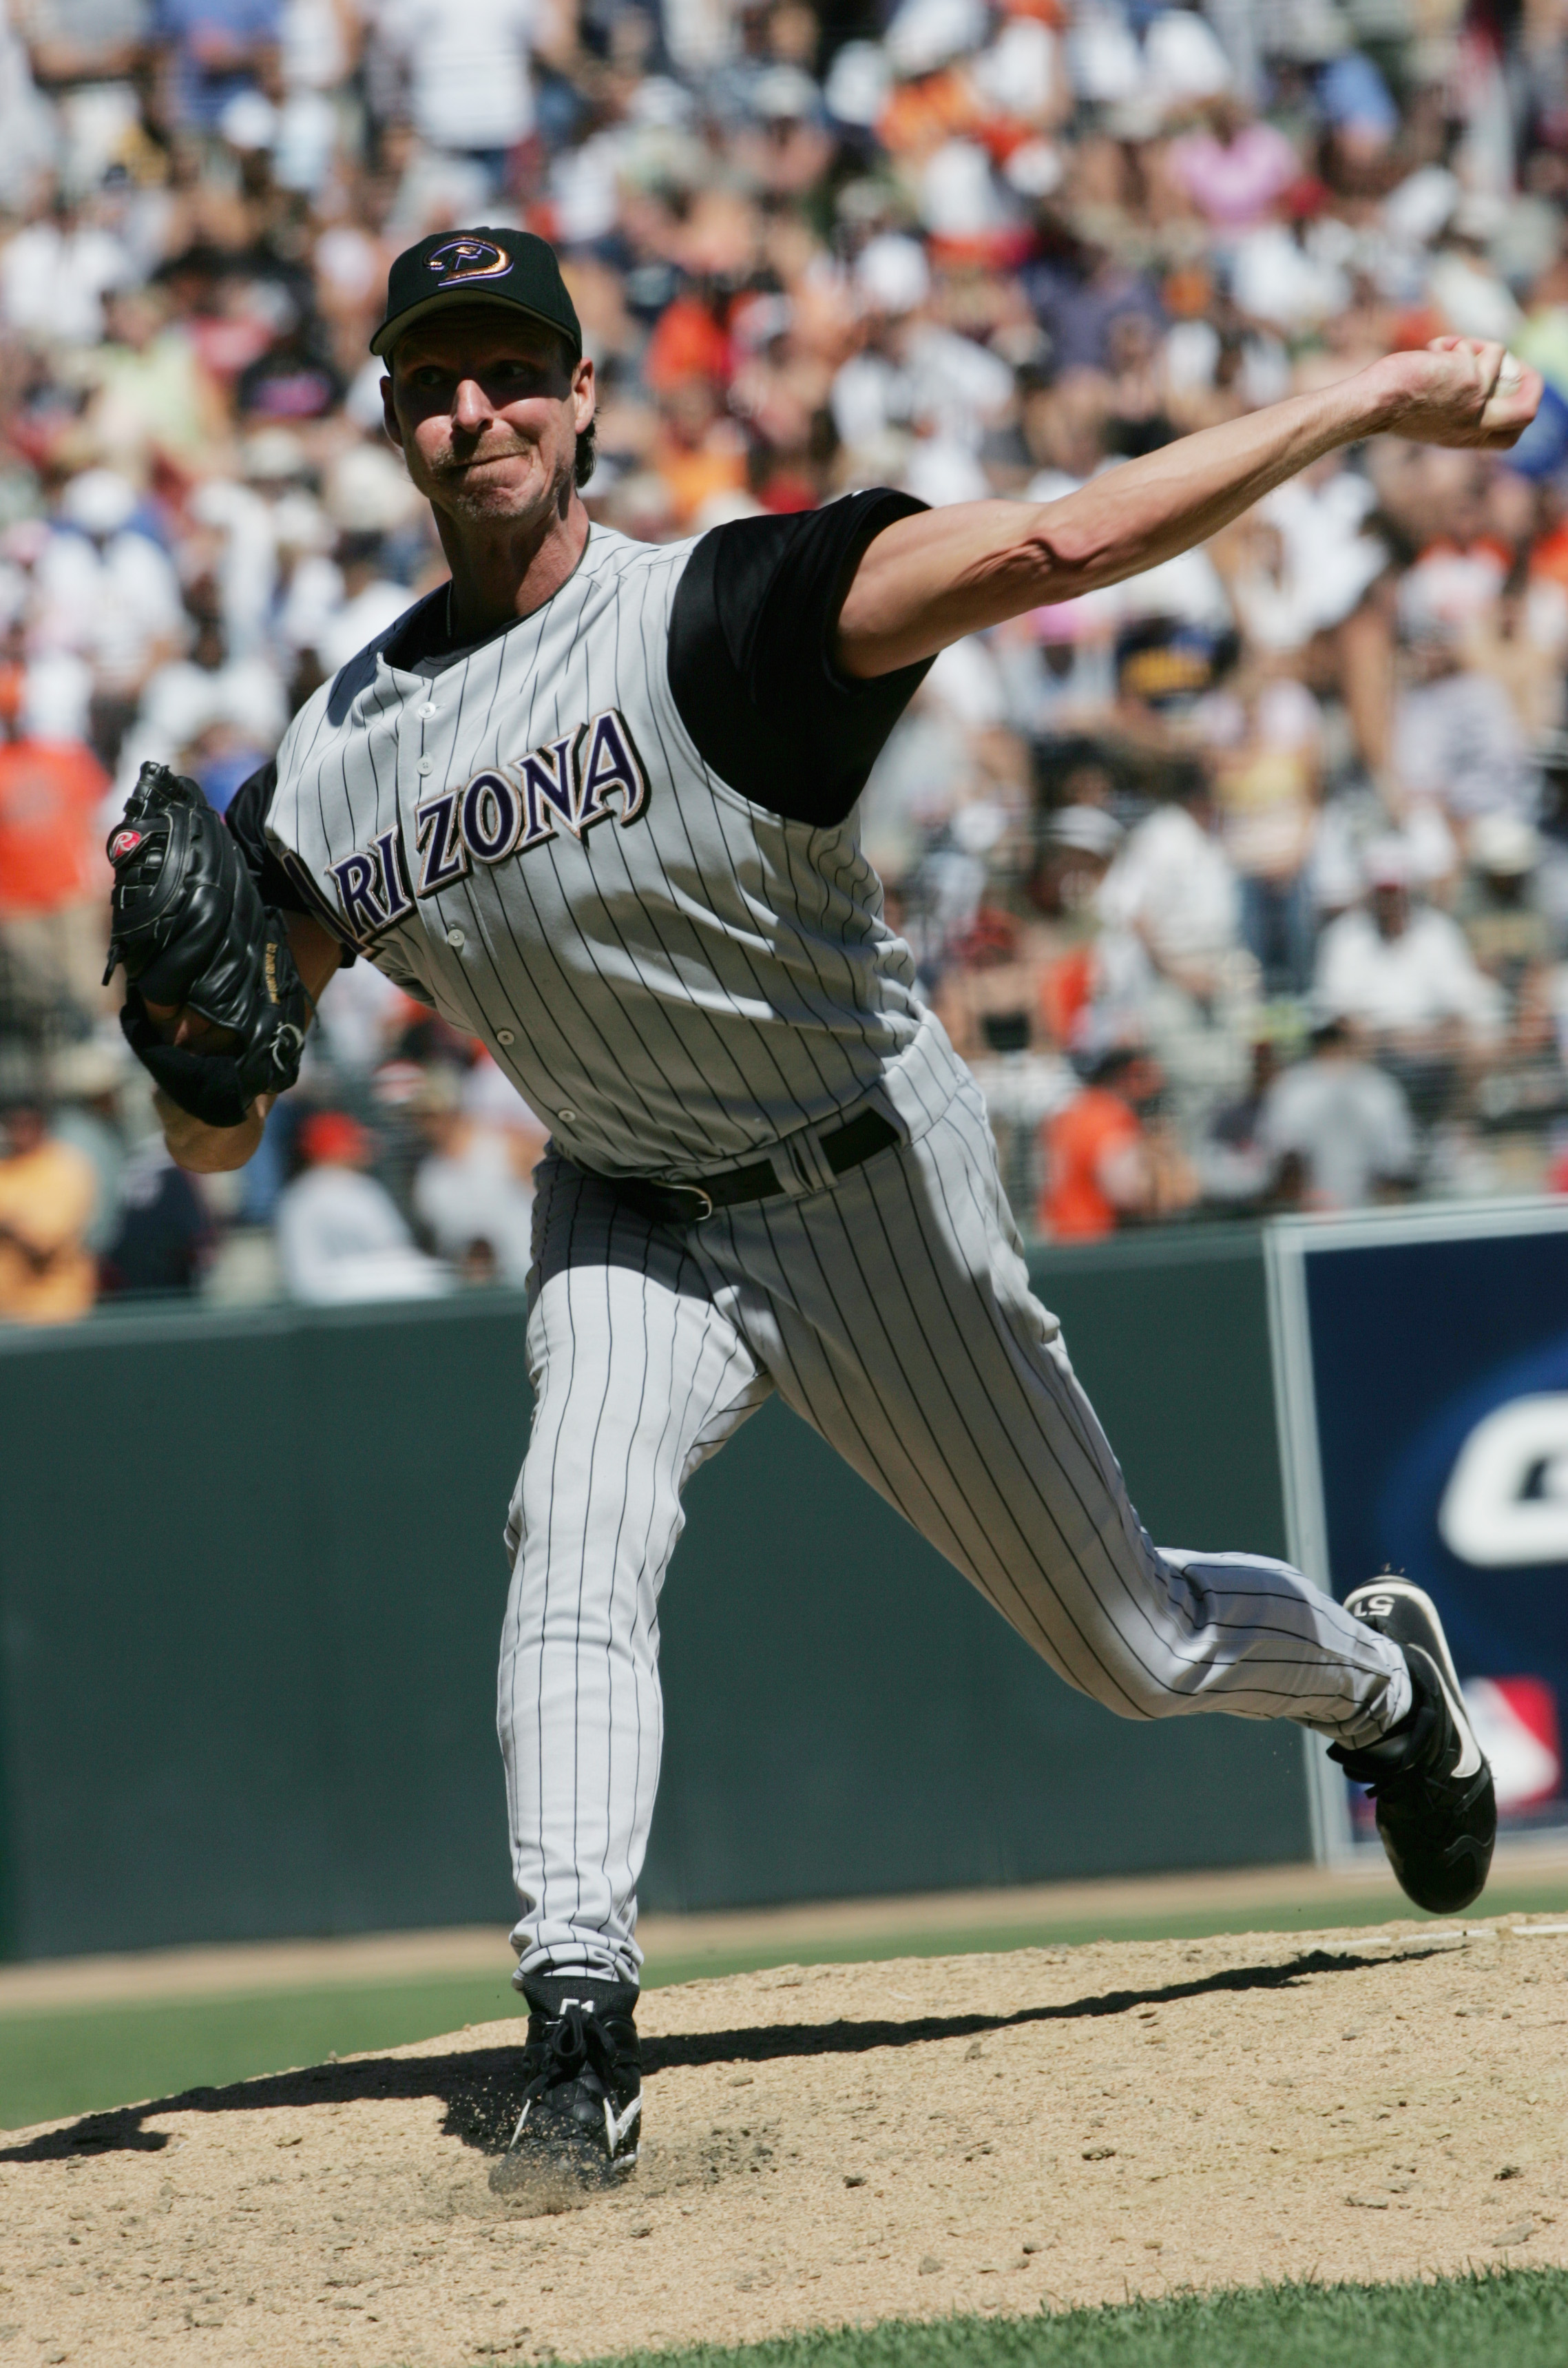 Fastest Pitchers in Baseball History - Top 10 Fastest Pitchers - News